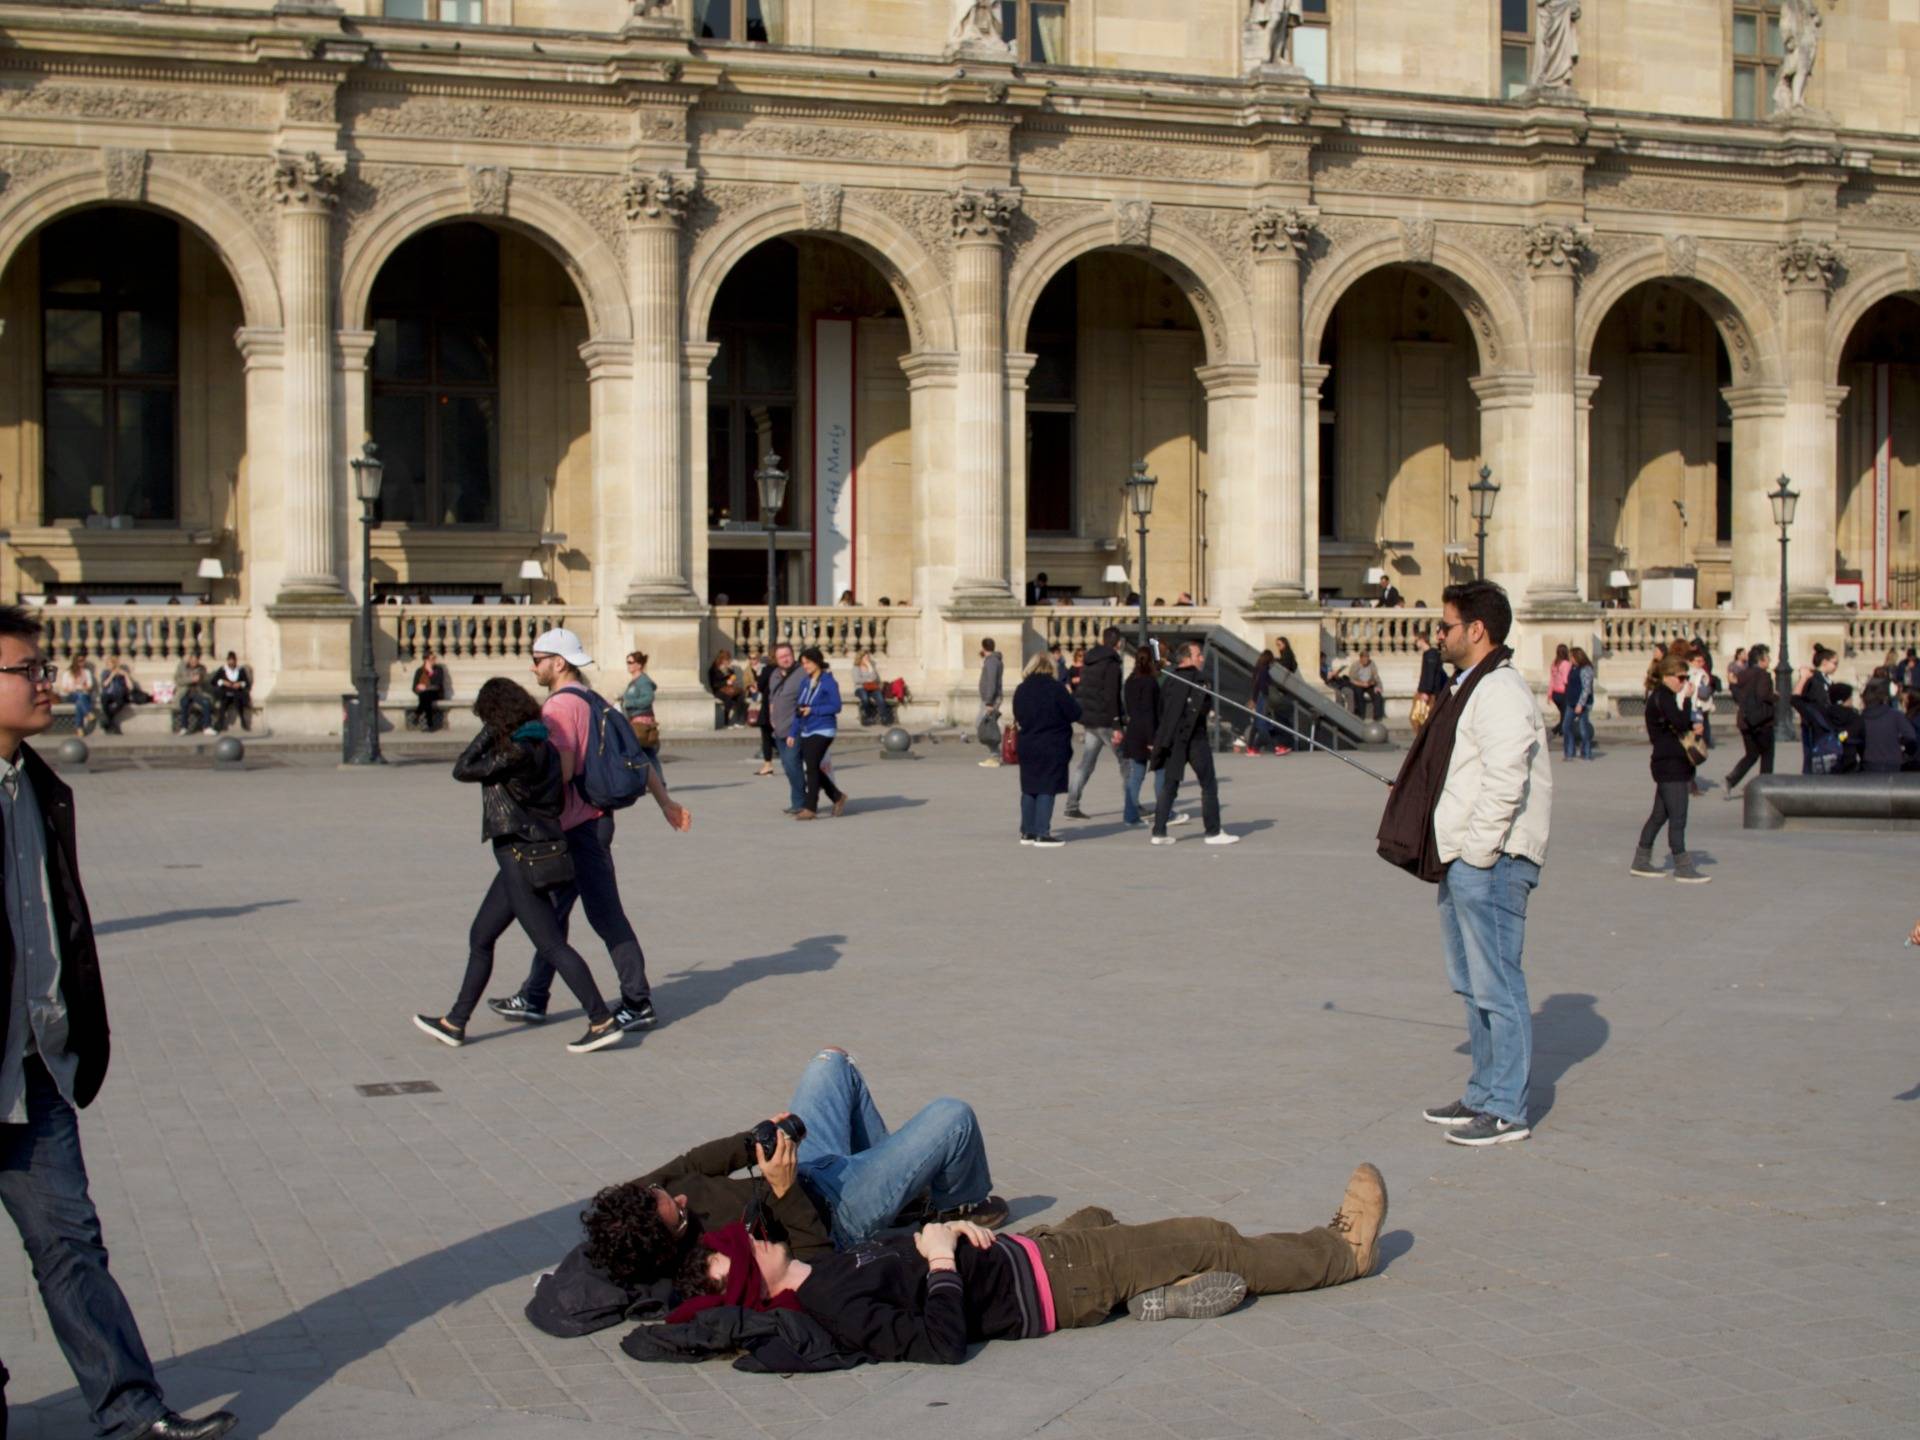 People making selfies everywhere on the square in front of the Louvre